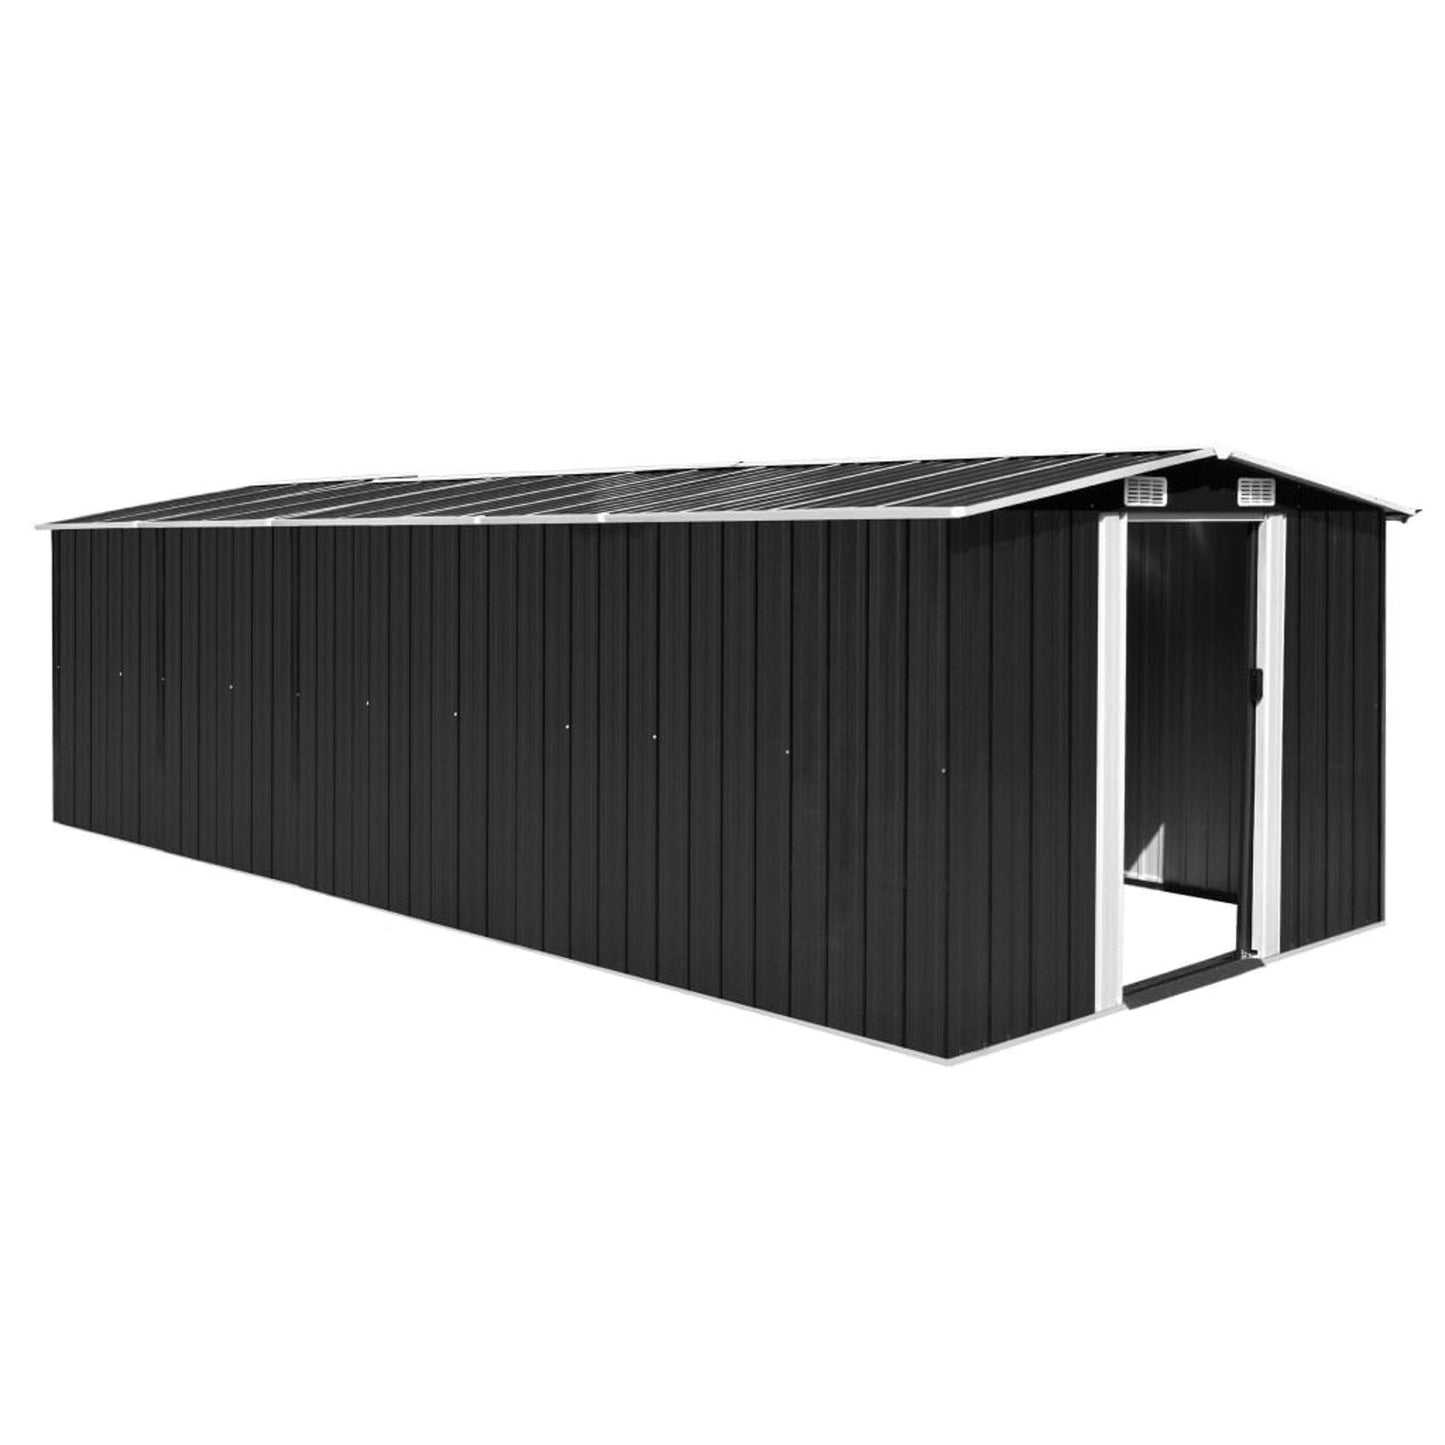 Gecheer Outdoor Storage Shed, Garden Shed House with Door & Vents, Galvanized Steel Storage Tool Shed for Backyard Patio Lawn for Bike, Garbage Can, Tool 101.2"x228.3"x71.3" Metal Anthracite 101.2 x 228.4 x 71.3